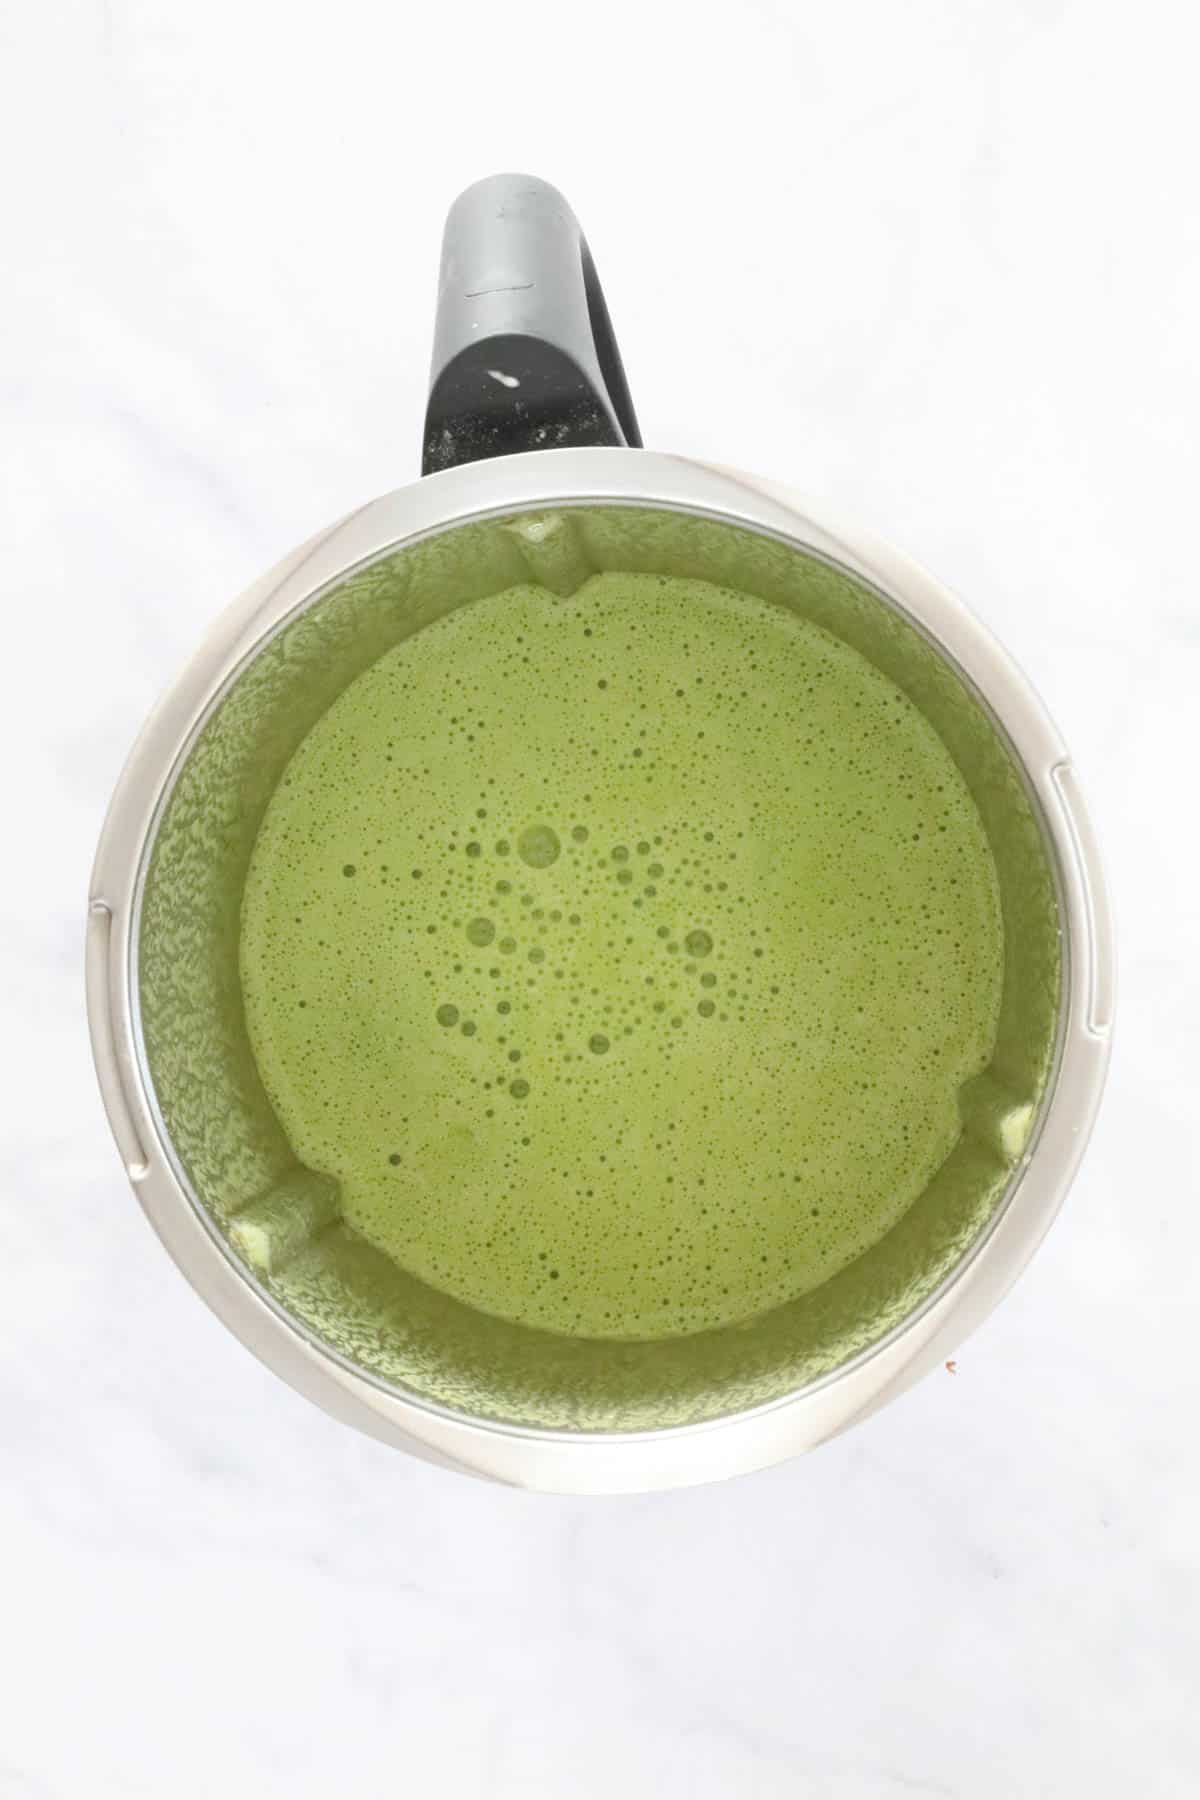 A Thermomix filled with green liquid.